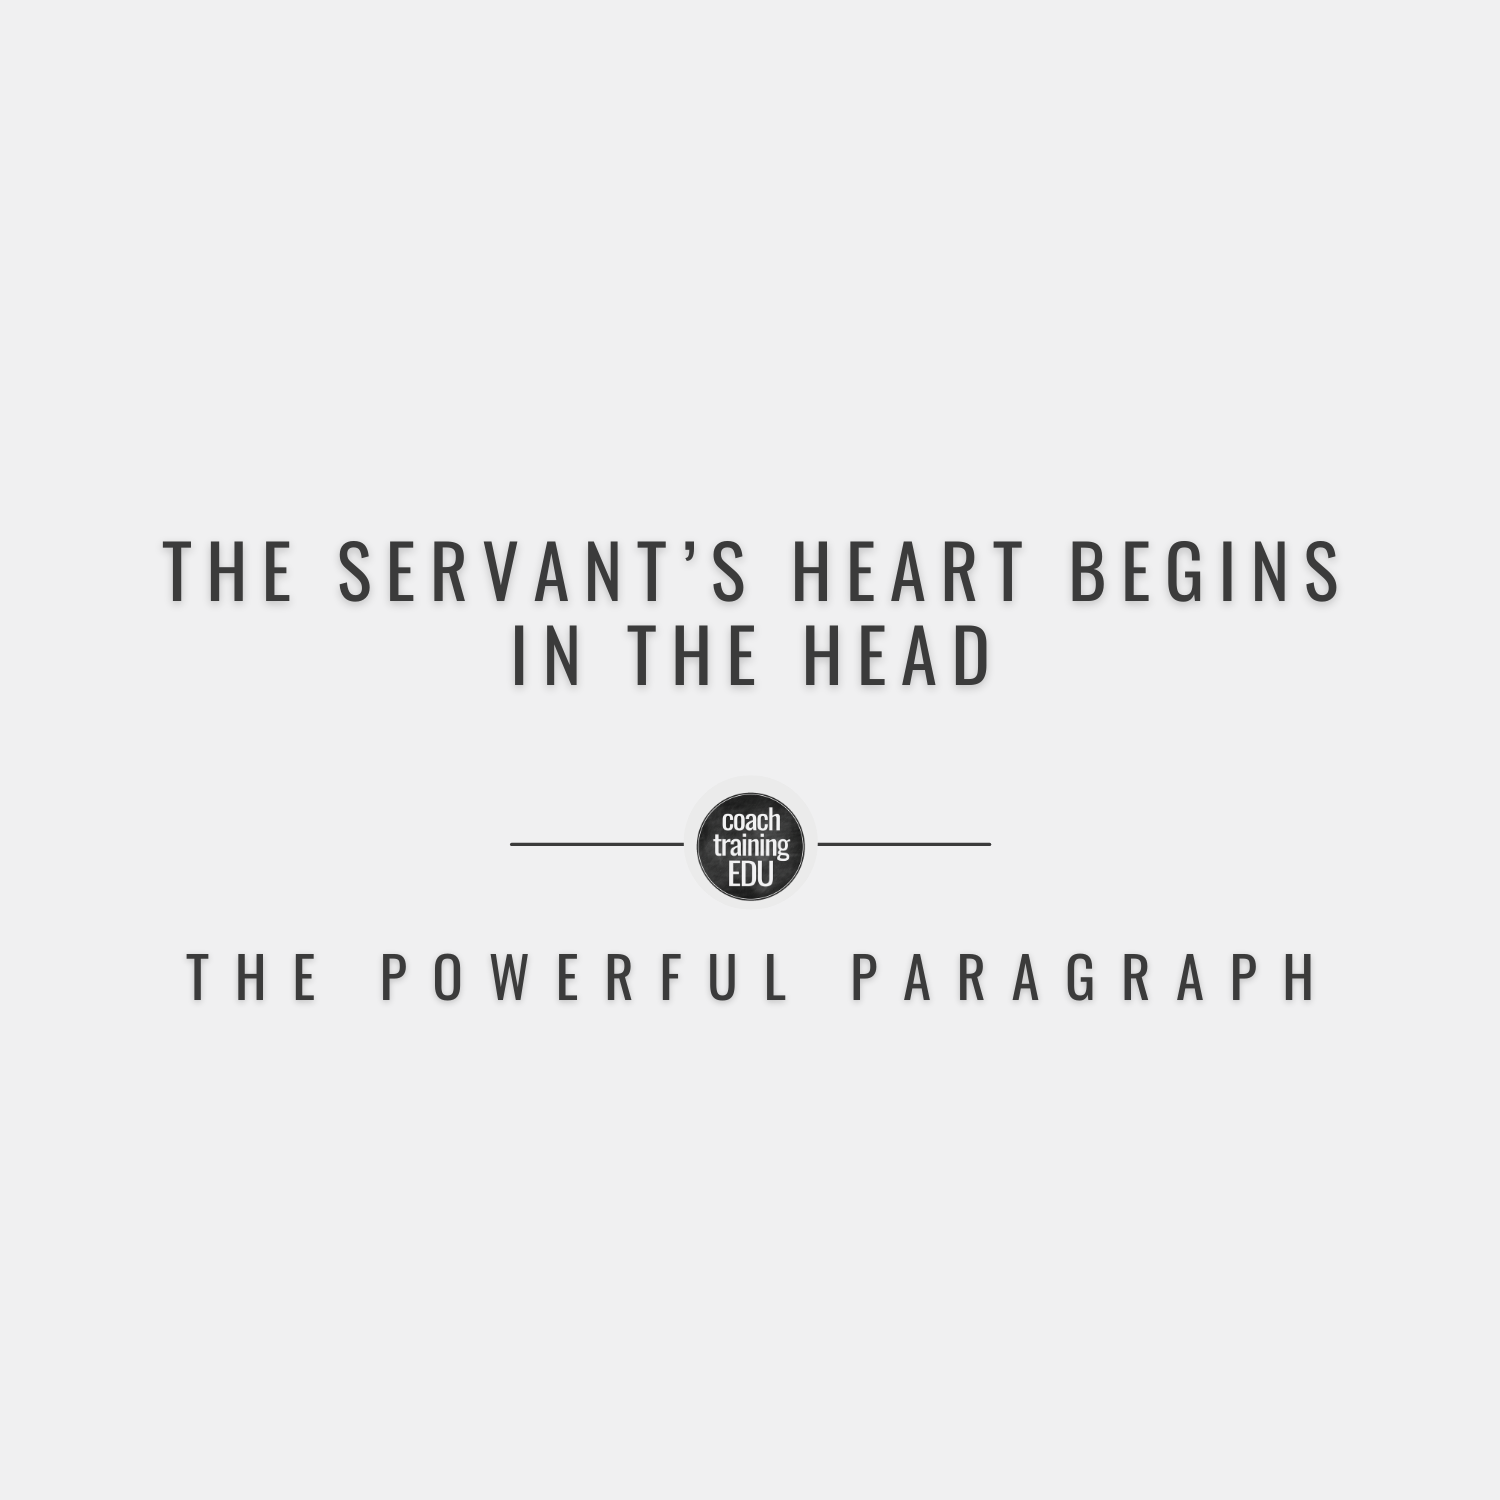 The Servant’s Heart Begins in the Head